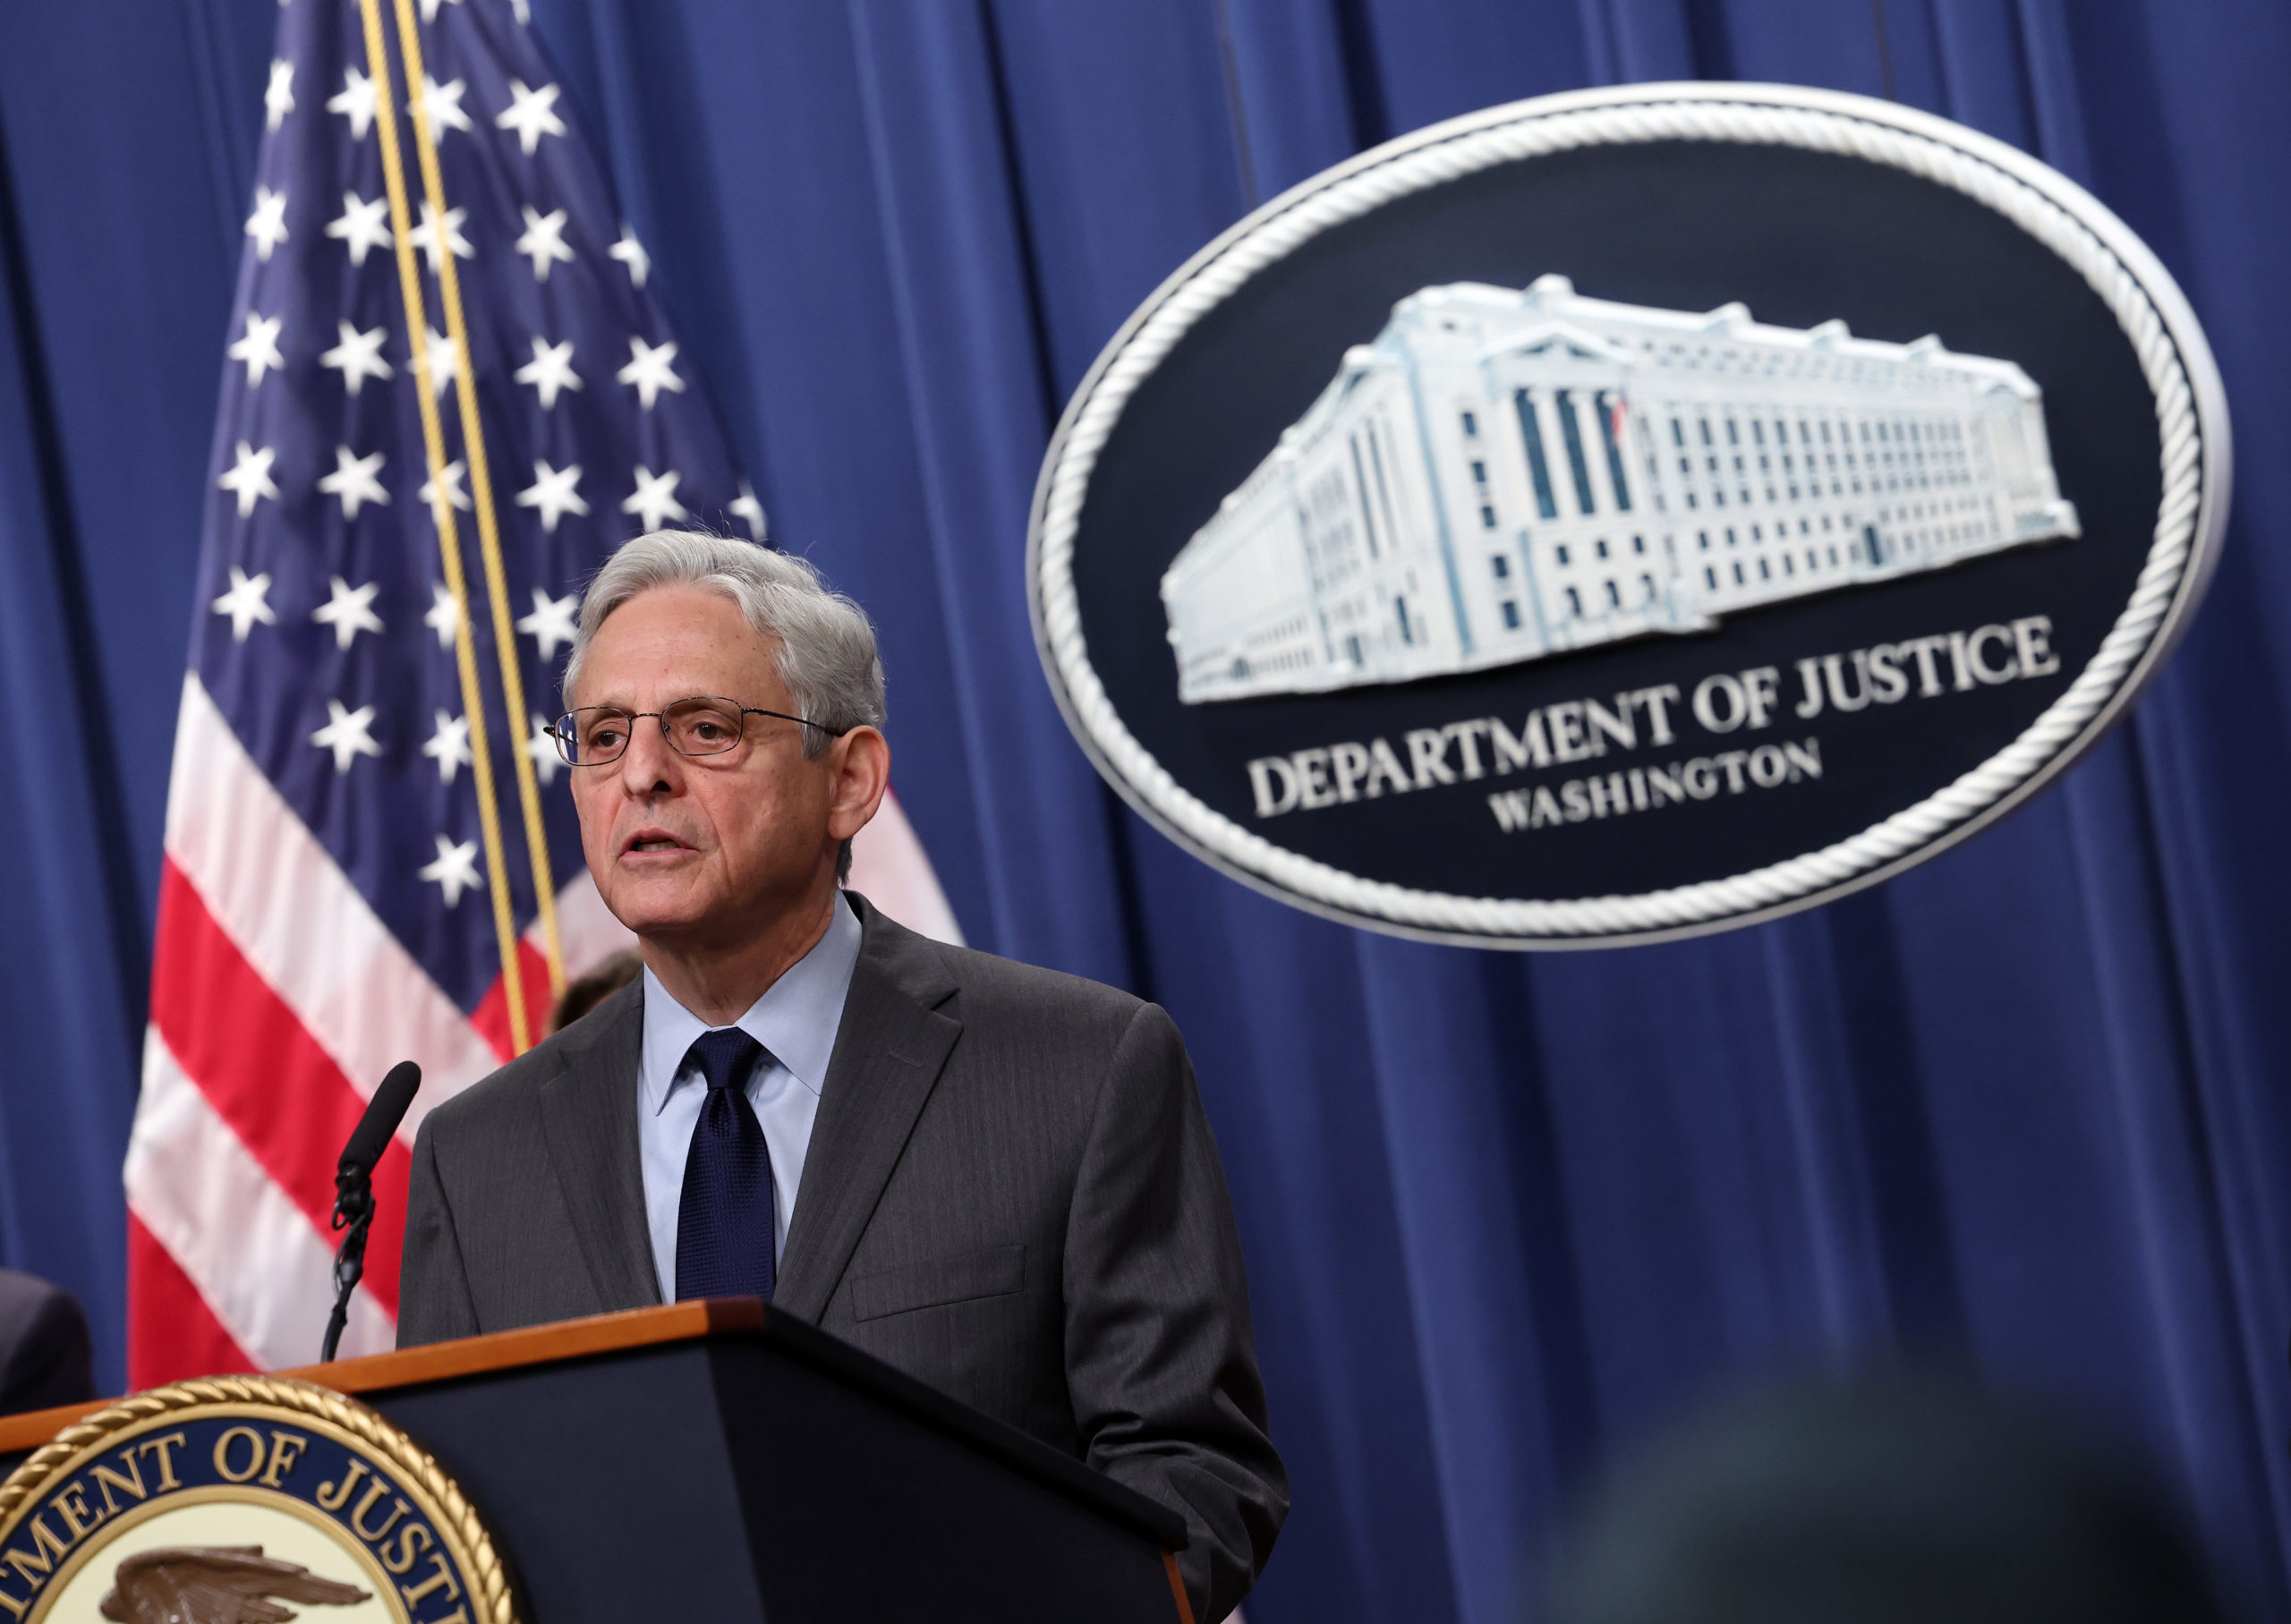 WASHINGTON, DC - OCTOBER 24: U.S. Attorney General Merrick Garland speaks at a press conference at the U.S. Department of Justice on on October 24, 2022 in Washington, DC. The Justice Department announced it has charged 13 individuals, including members of the Chinese intelligence and their agents, for alleged efforts to unlawfully exert influence in the United States for the benefit of the government of China. (Photo by Kevin Dietsch/Getty Images)